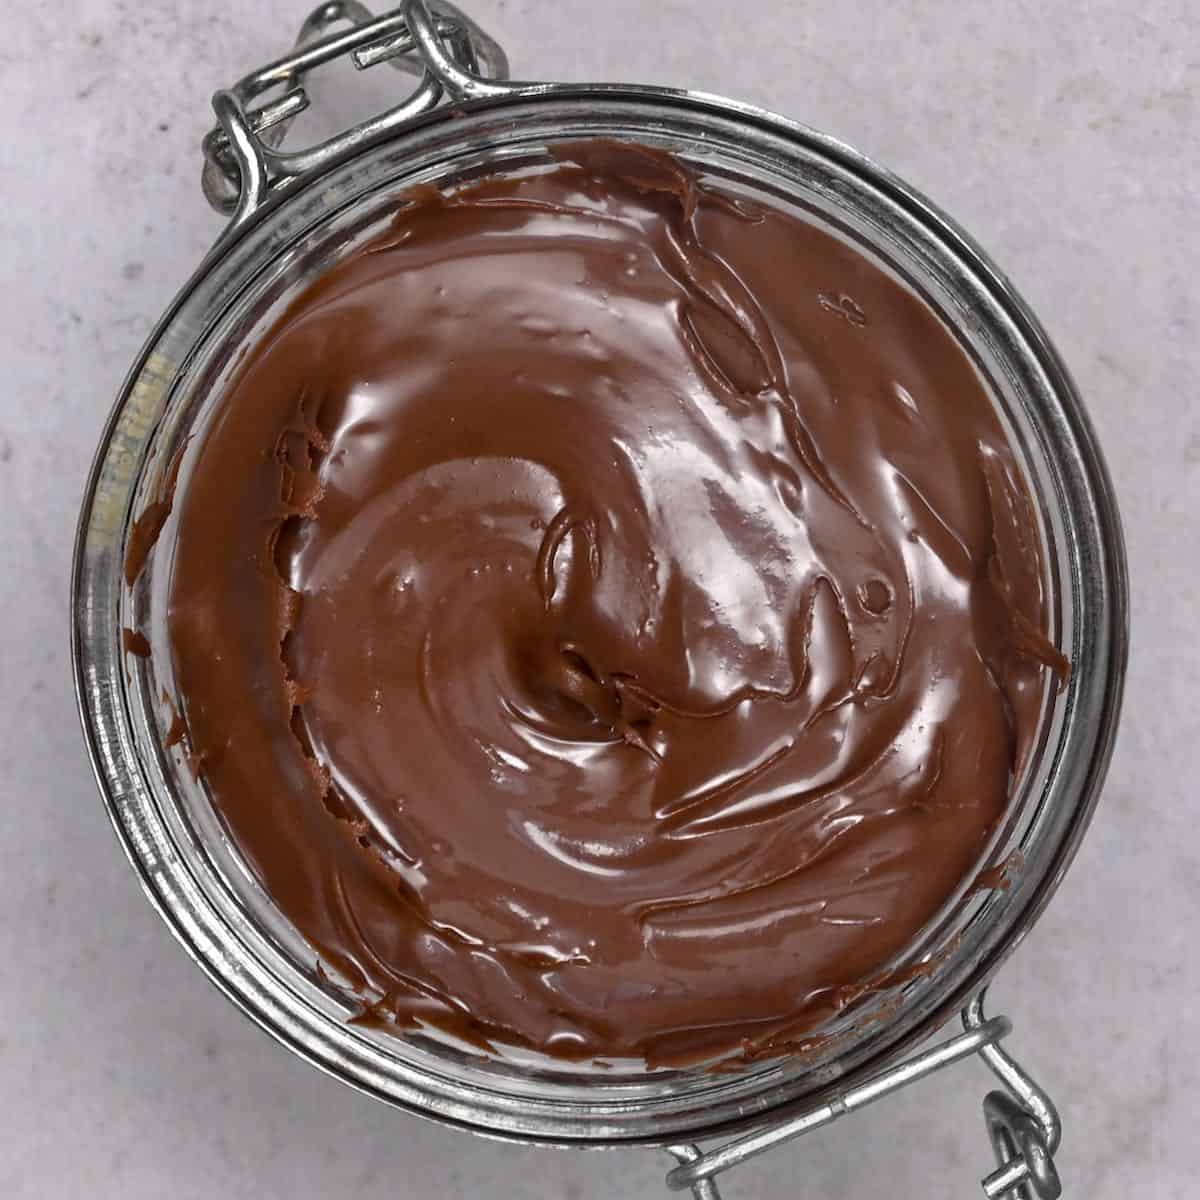 top view of chocolate spread